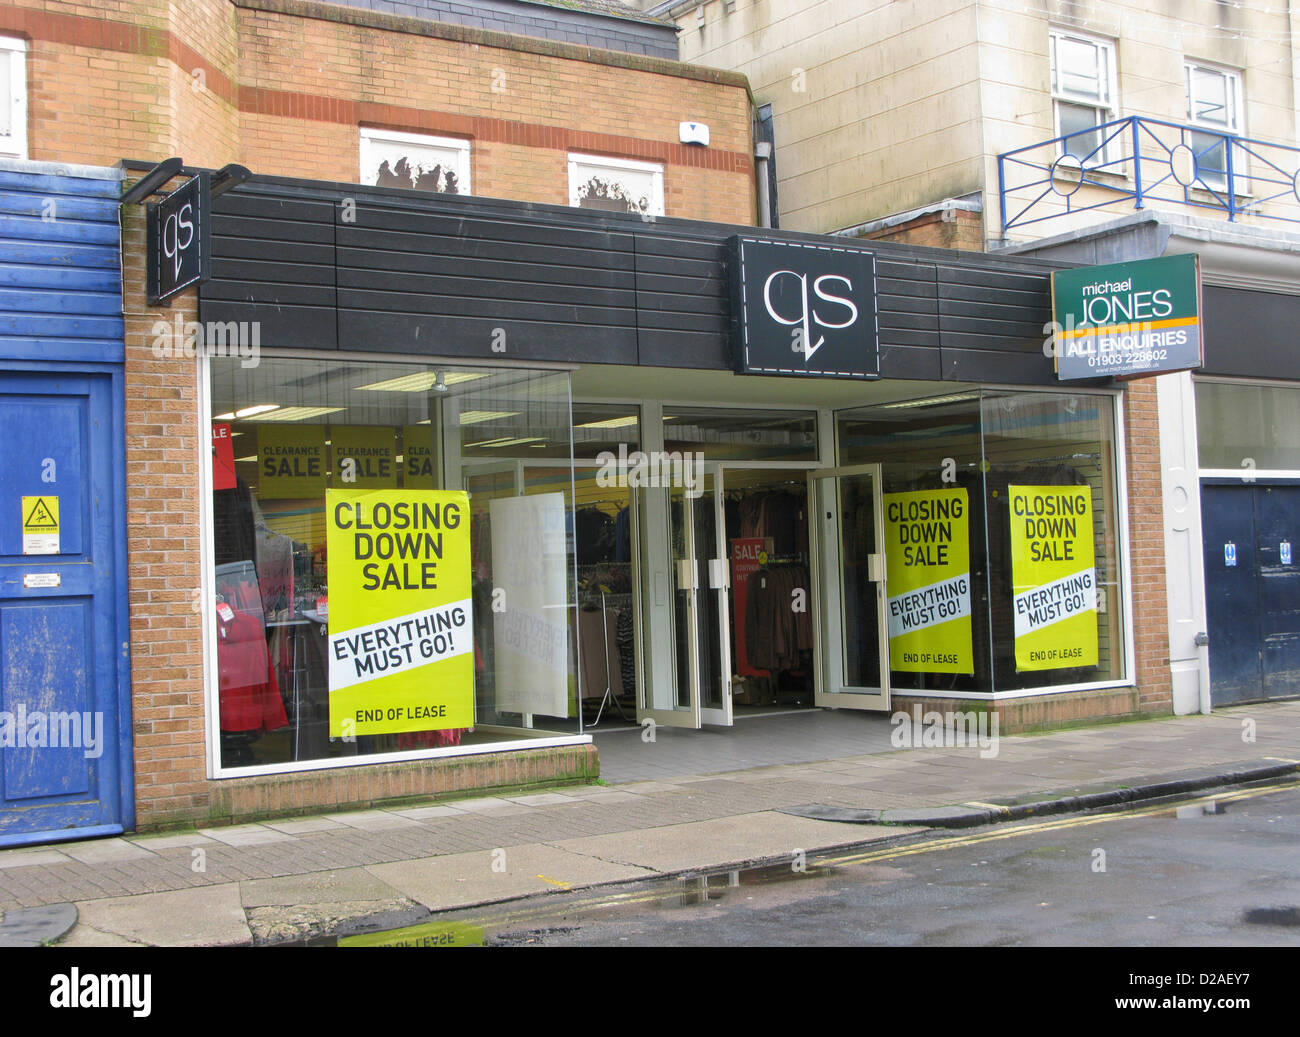 Closing down sale at QS fashion clothing retail shop on the high street Worthing West Sussex UK Stock Photo